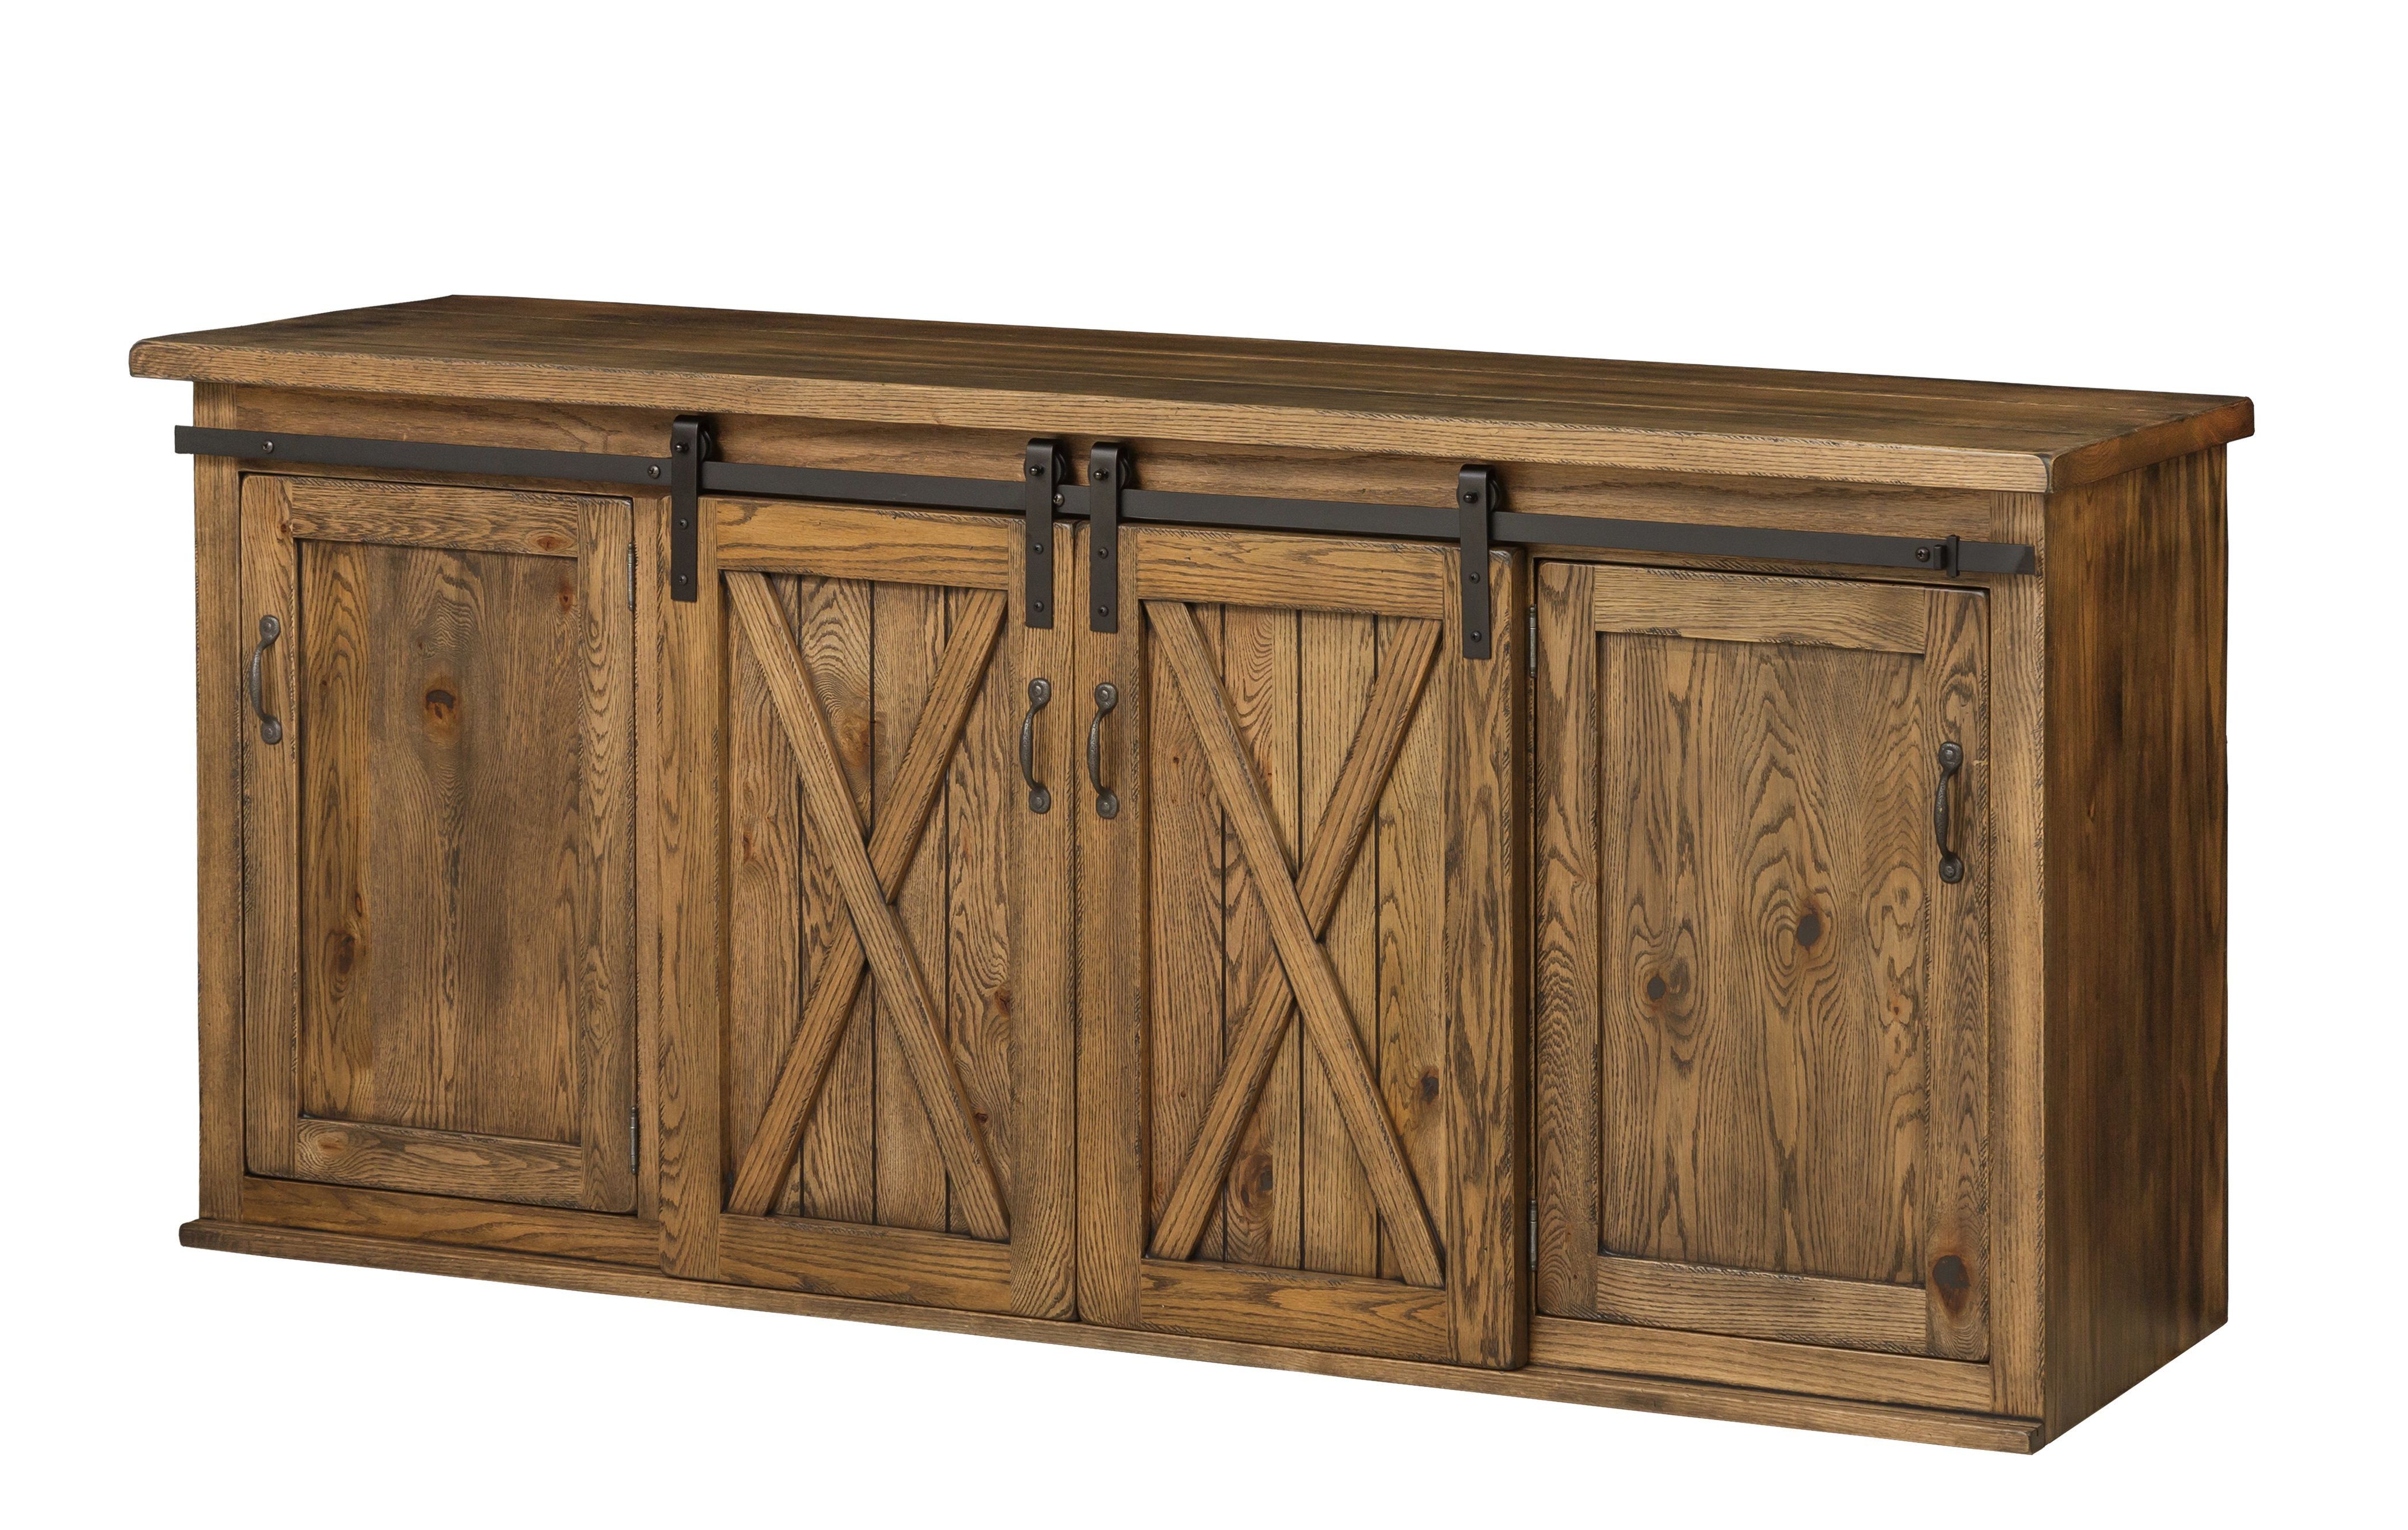 Sideboards Double Barn Door Buffet With Famous New England 74" Dining Buffet With Sliding Barn Doors From (View 3 of 10)